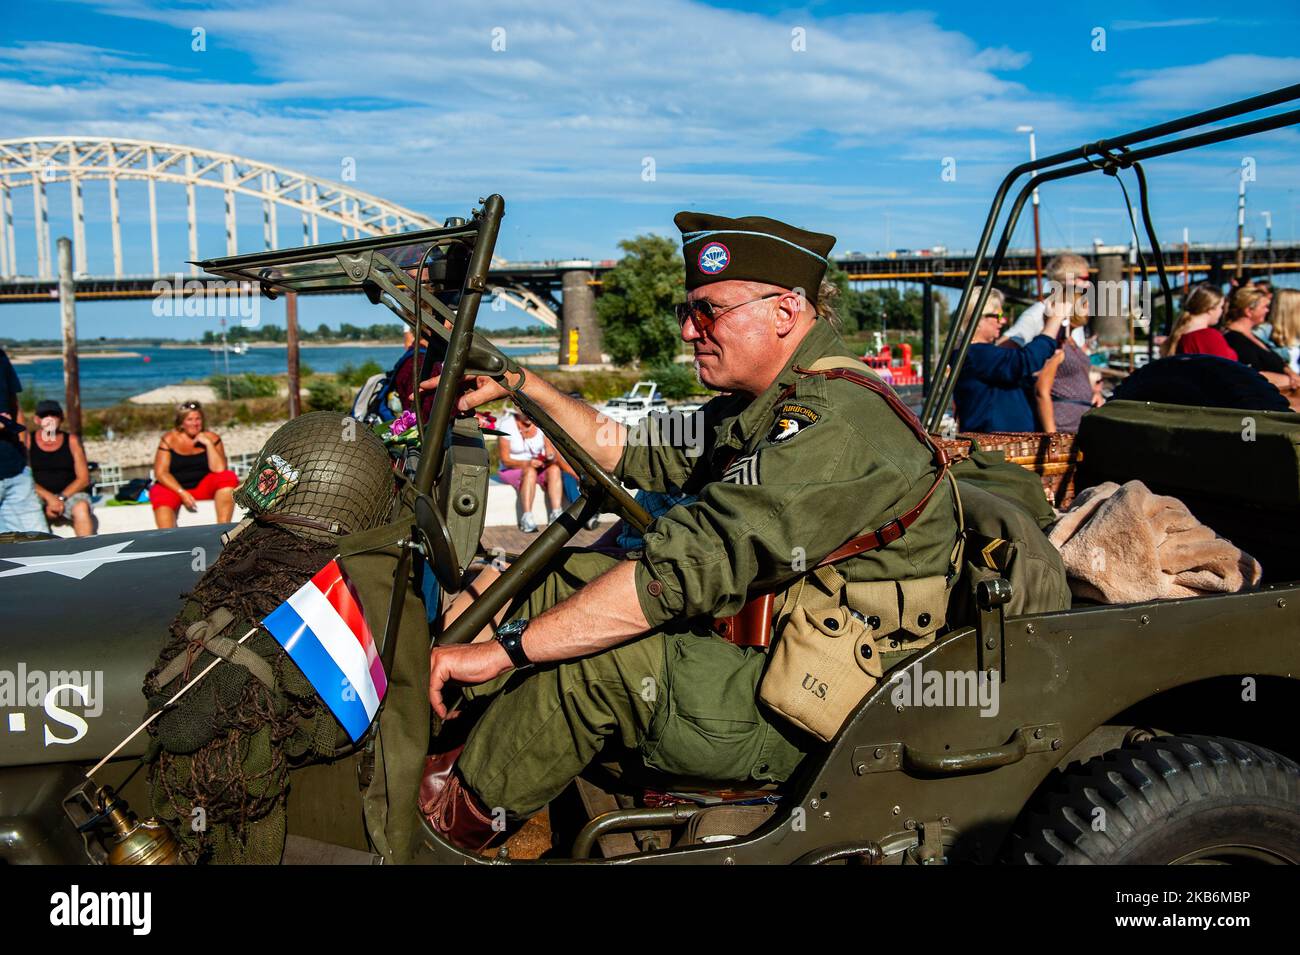 In 2019 is commemorating 75 years since Operation Market Garden took place, in Nijmegen, on September 22, 2019. Operation Market Garden was one of the largest Allied operations of the Second World War. It took place on September 1944. At the time, the Allied Forces traveled from Belgium through several locations in the Netherlands, to finally end up in Nijmegen and Arnhem. The event started in the Belgian town of Leopoldsburg on September 14th. A military vehicle parade with around 600 army vehicles from the Second World War drove from the basecamp in Veghel to end in Nijmegen. This operation  Stock Photo